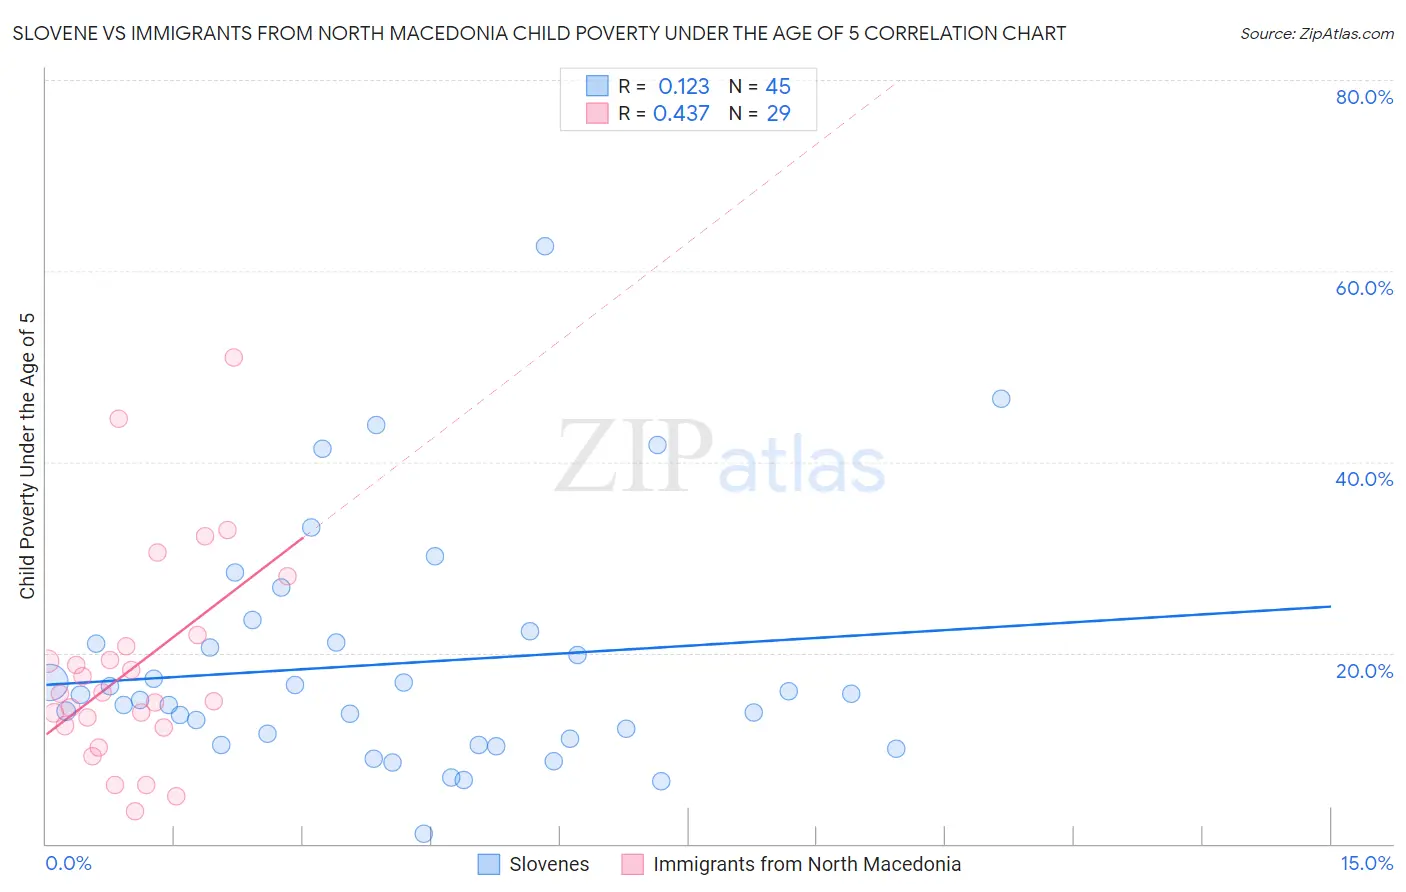 Slovene vs Immigrants from North Macedonia Child Poverty Under the Age of 5